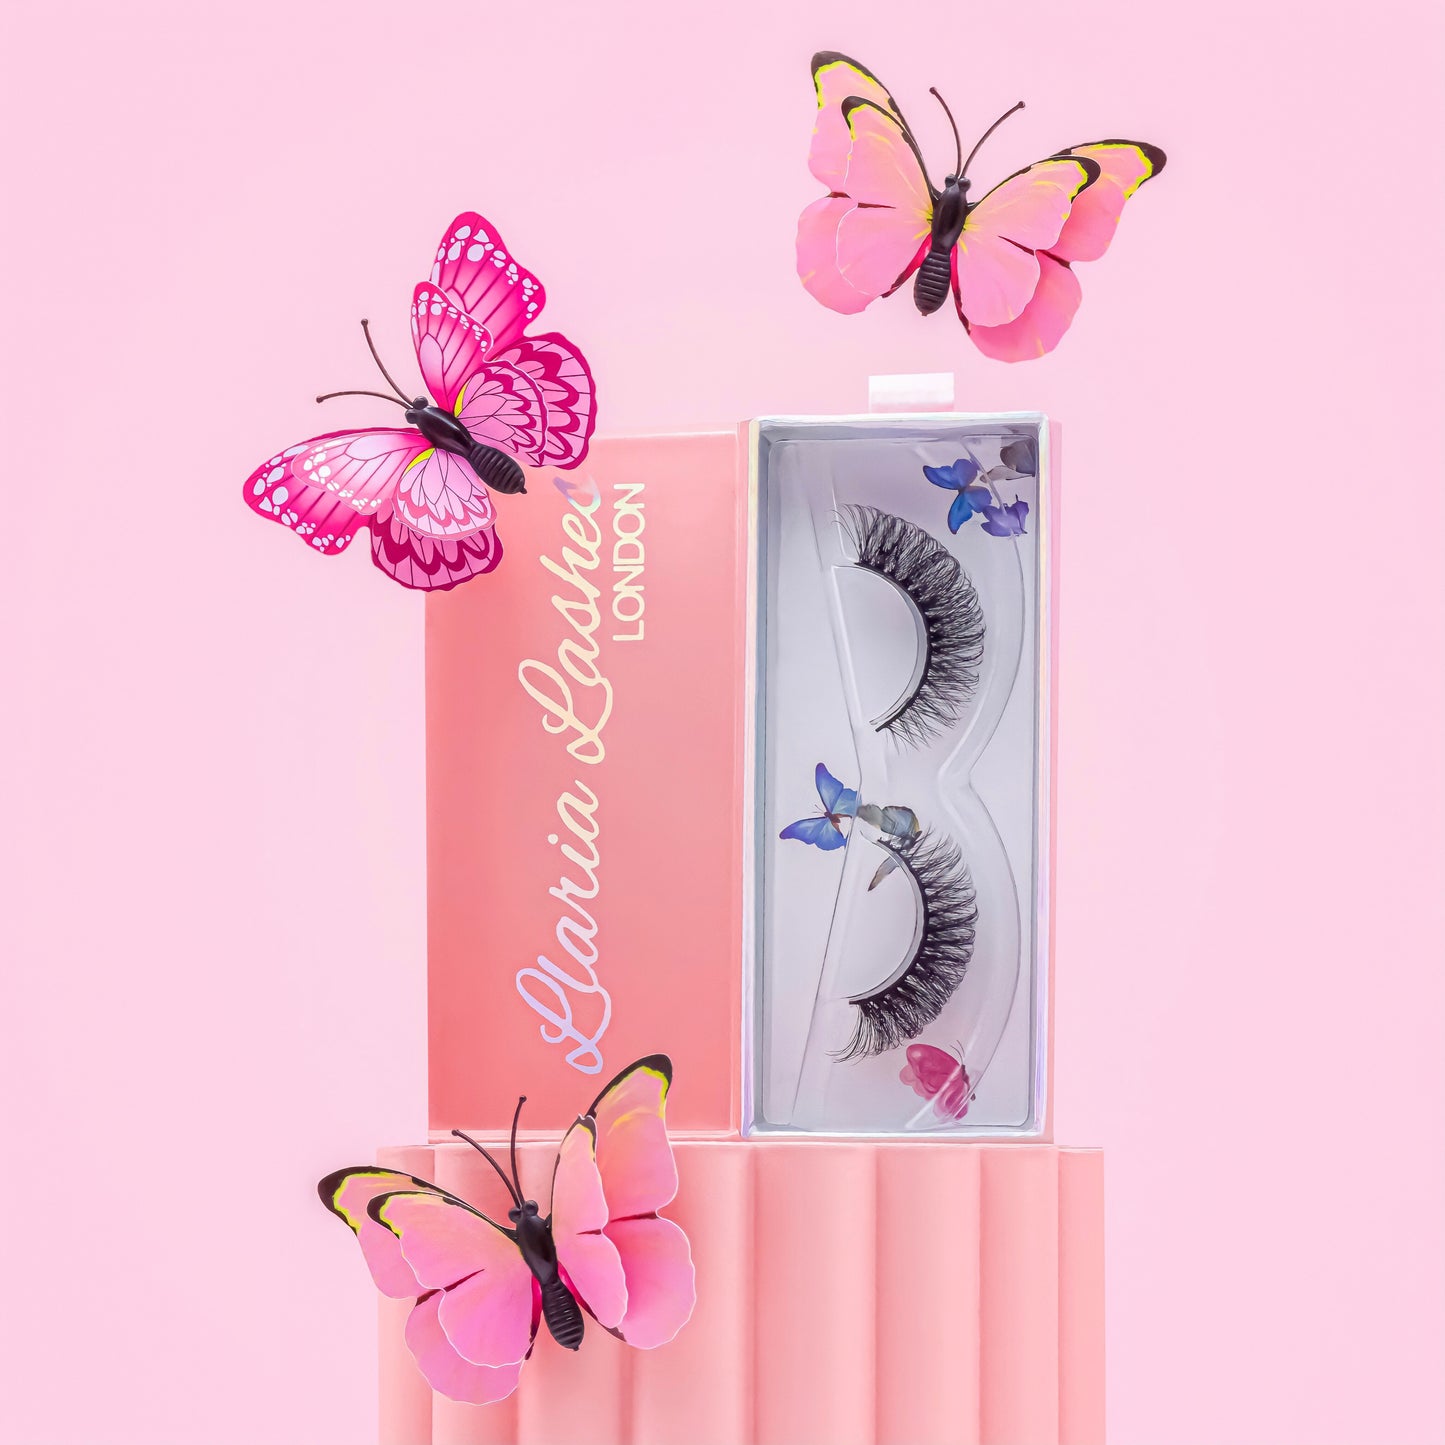 long and dramatic d curl russian style strip false eyelashes in lash box.